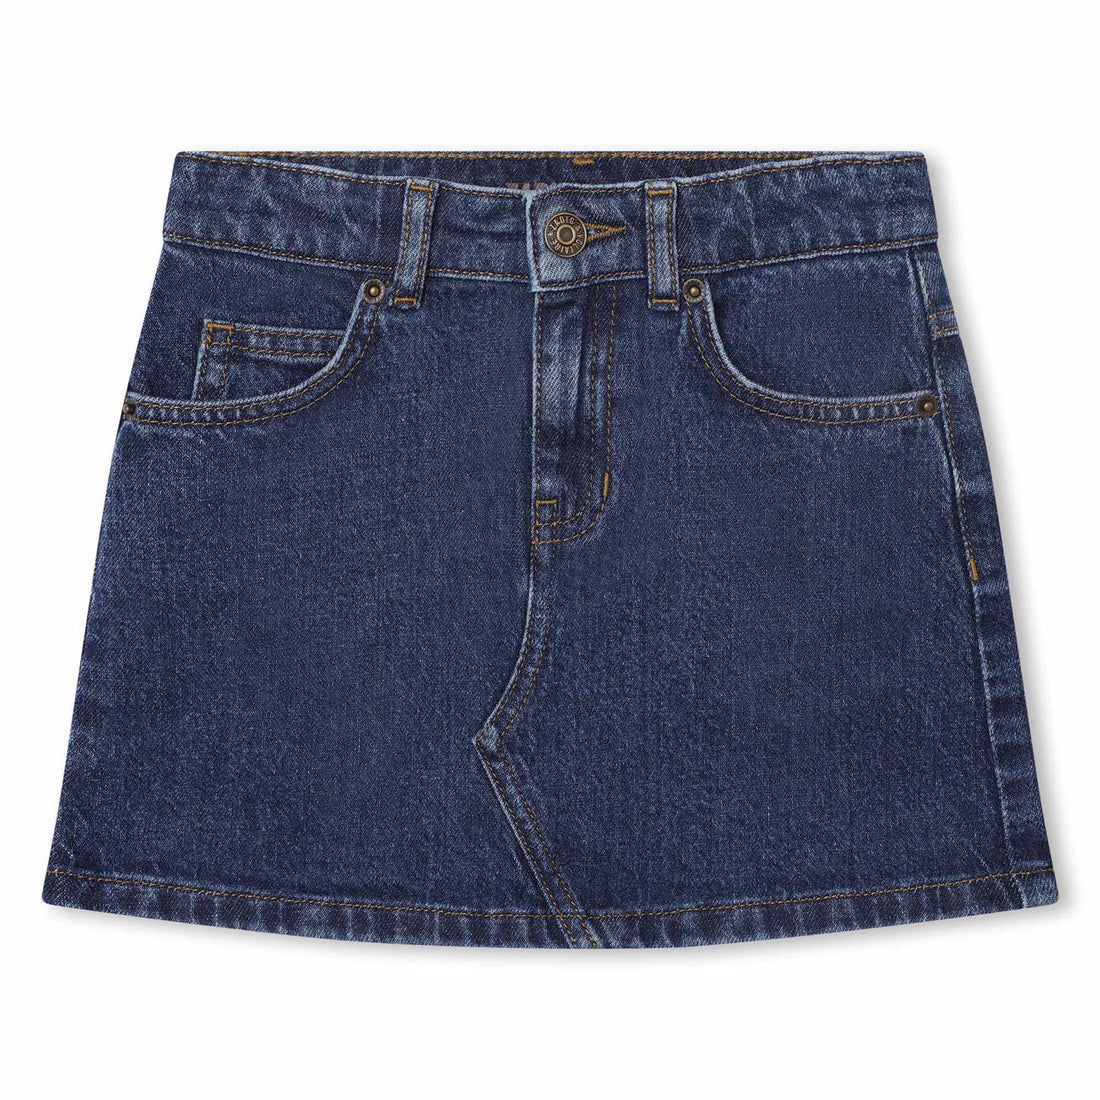 Zadig and Voltaire Rinse Wash Denim Skirt